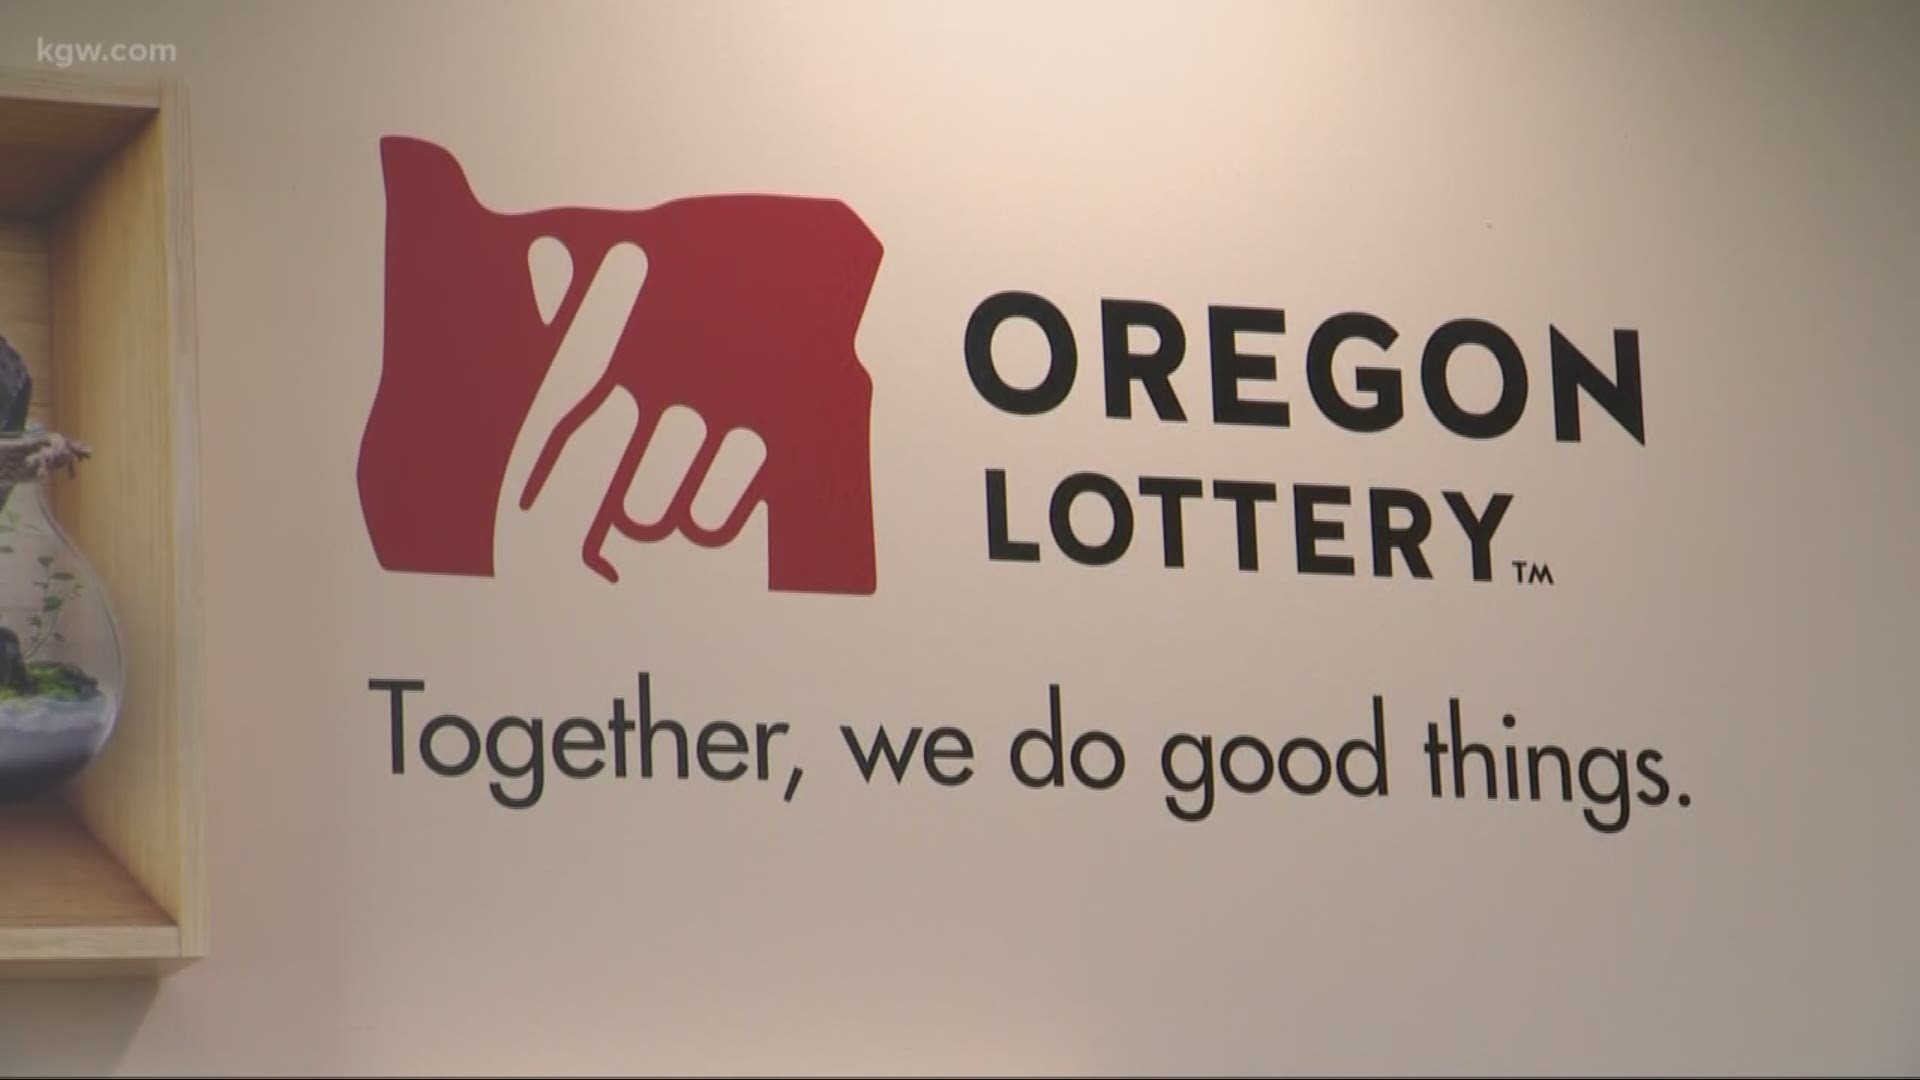 The Oregon Lottery is planning to offer cash prizes as incentive to get vaccinated against COVID-19, a source with knowledge of the plans told KGW on Thursday.